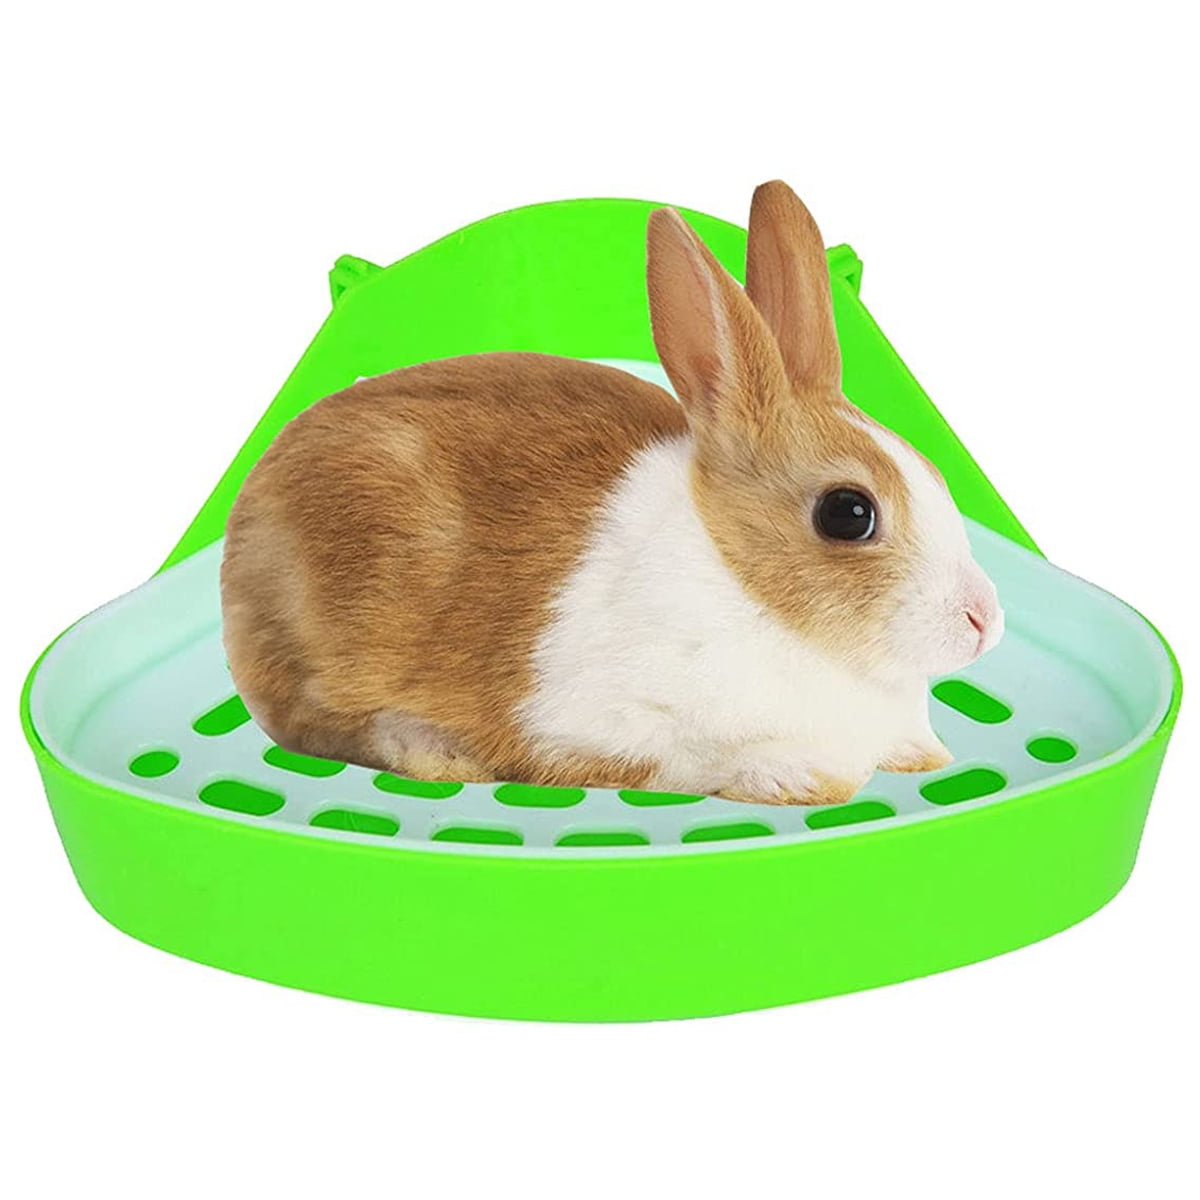 HXHON Rabbit Grass Bed Portable Woven Small Animals Laying Sleeping Playing Bed for Rabbits Chinchillas Guinea Pigs